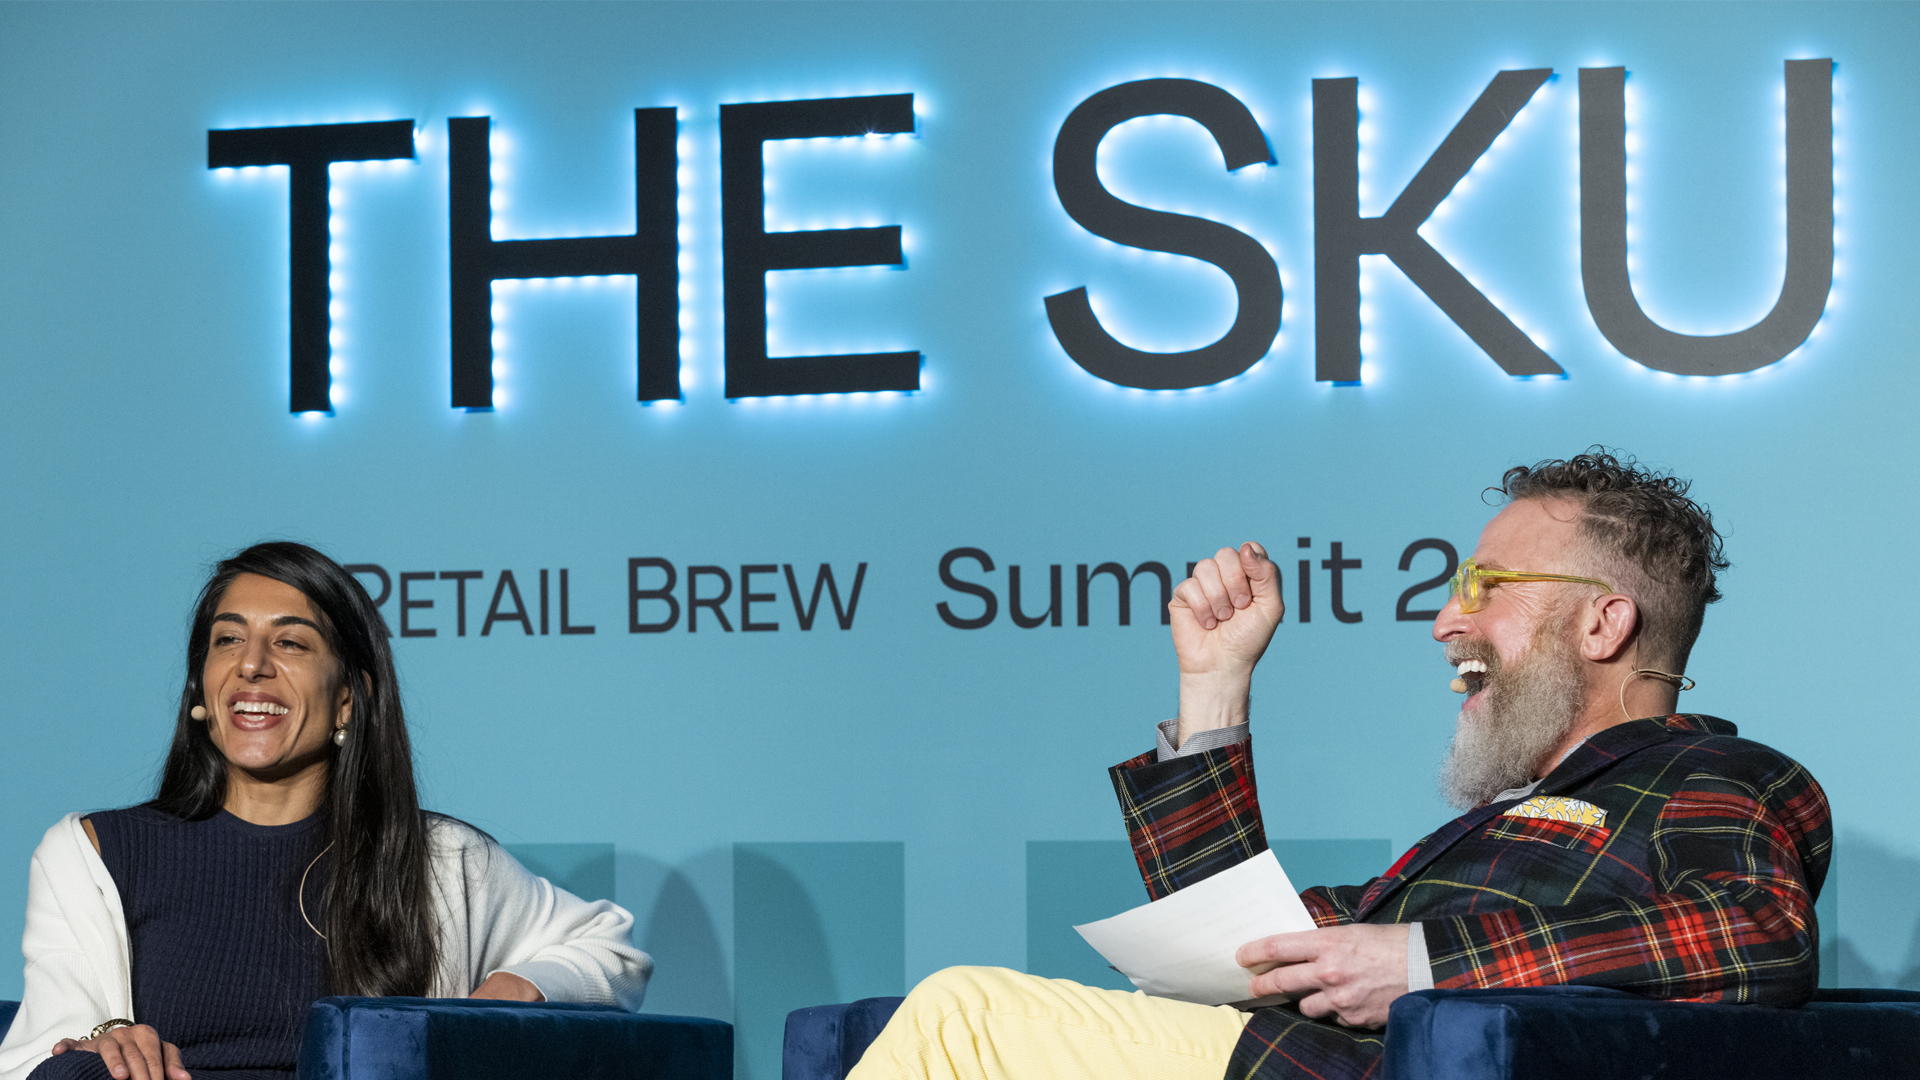 Two people on stage speaking The SKU Retail Brew Summit 2022